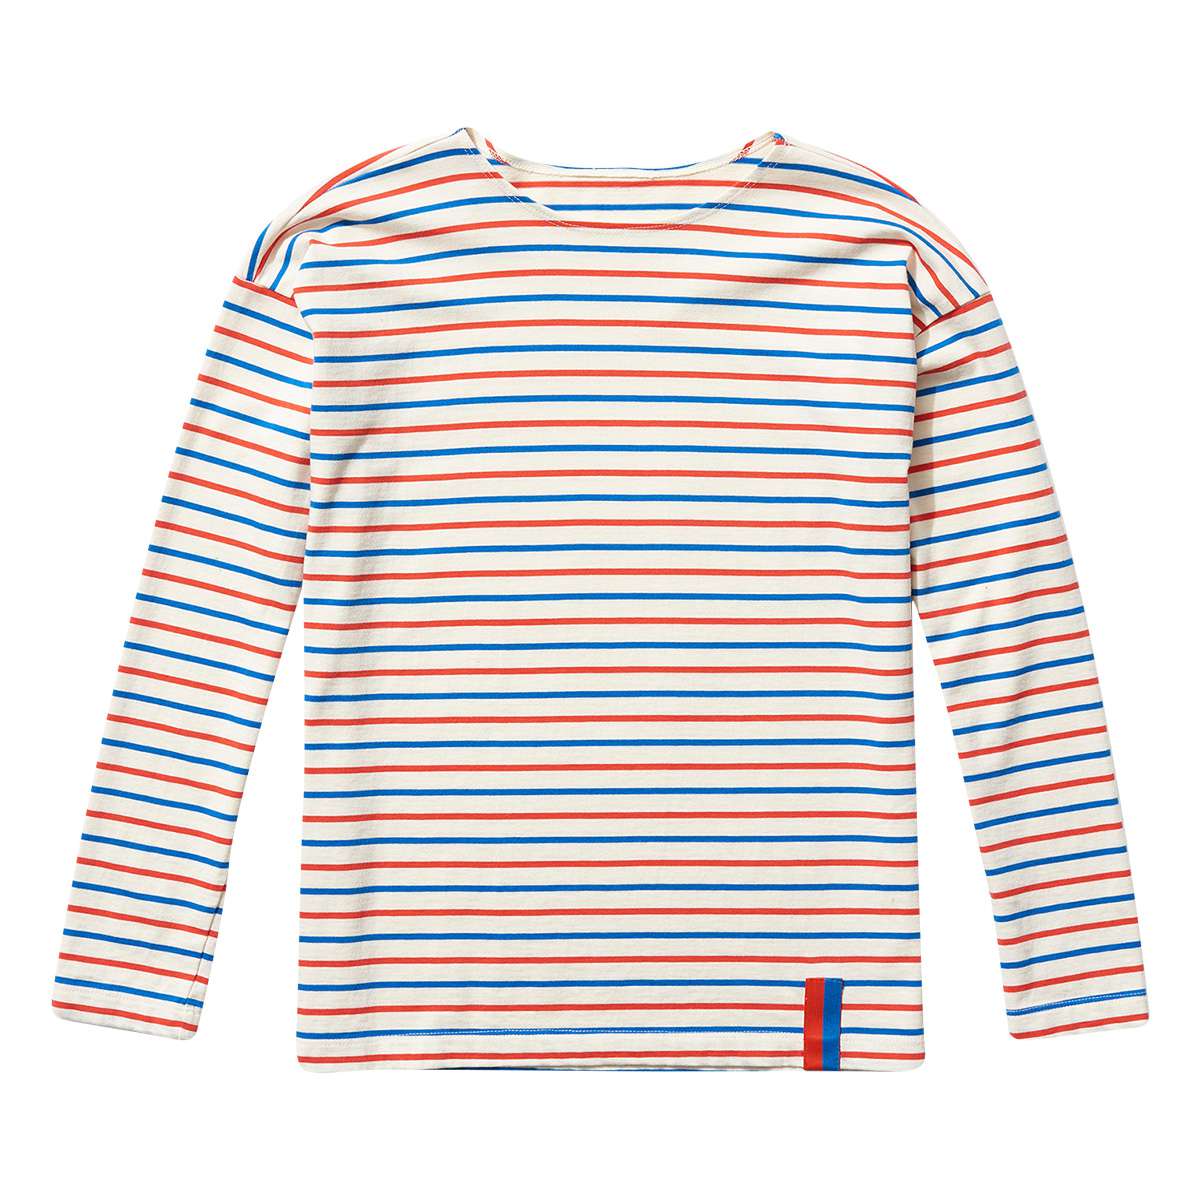 The Perfect Striped Tee